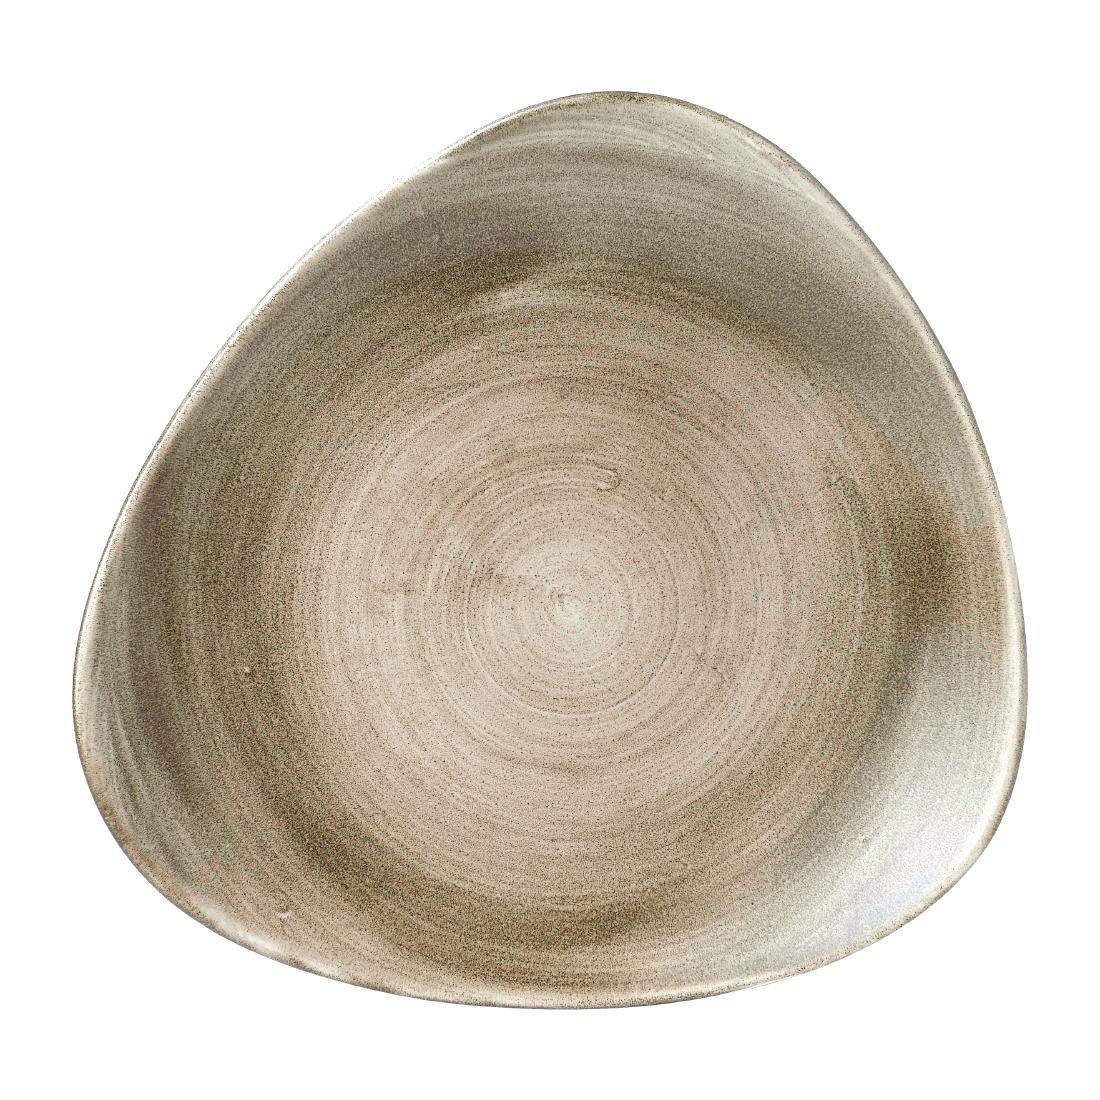 Churchill Stonecast Patina Lotus Plates Antique Taupe 254mm (Pack of 12) - FD863  - 1